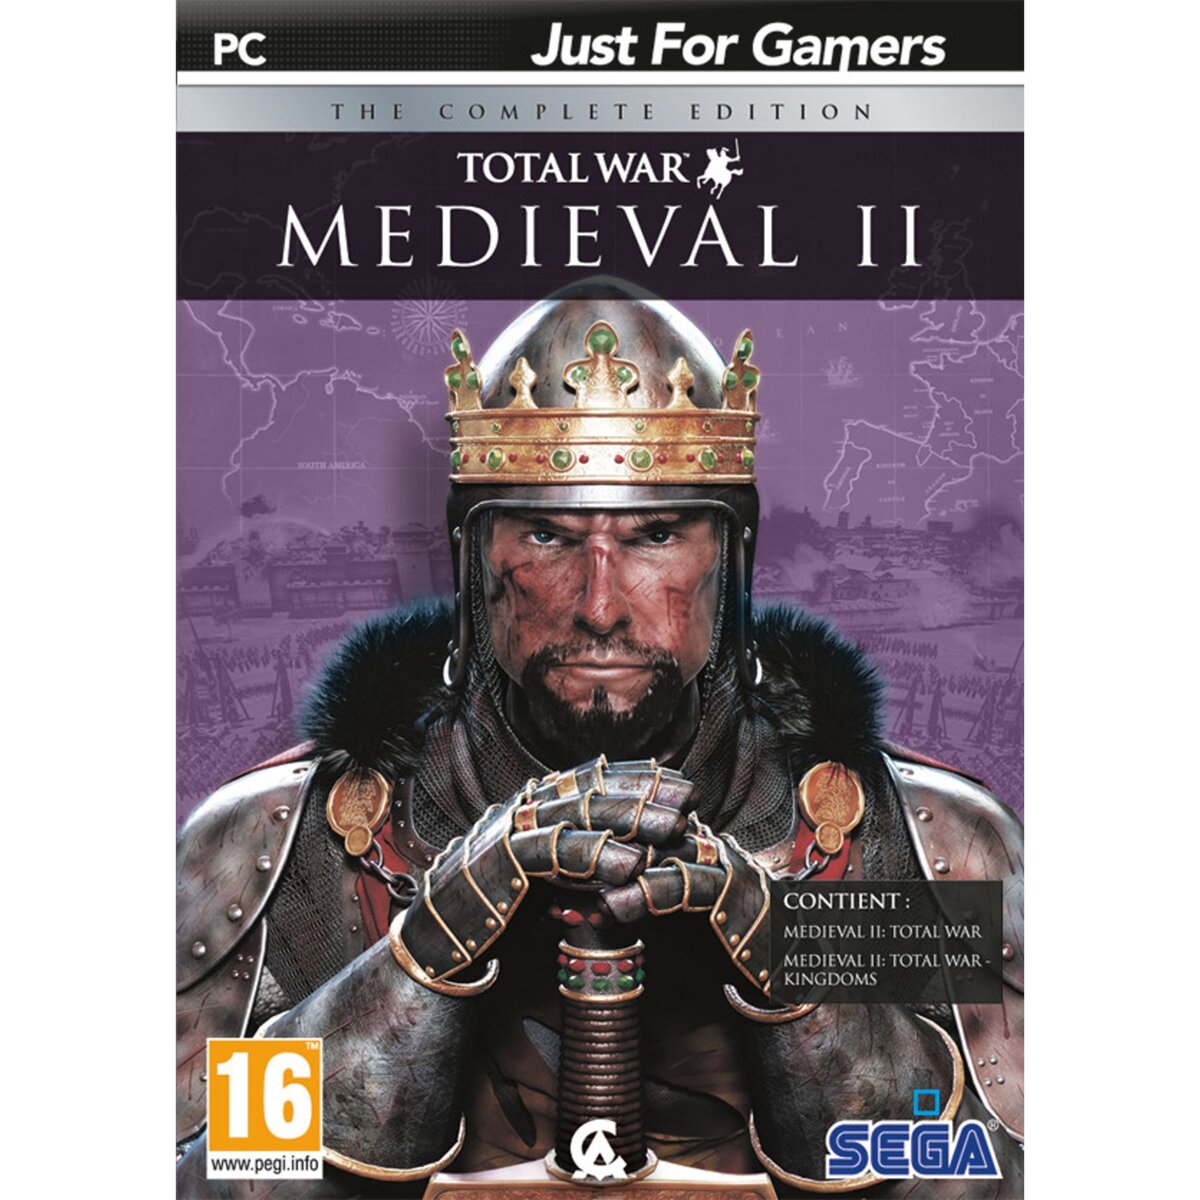 Medieval II : Total War - The Complete Edition PC